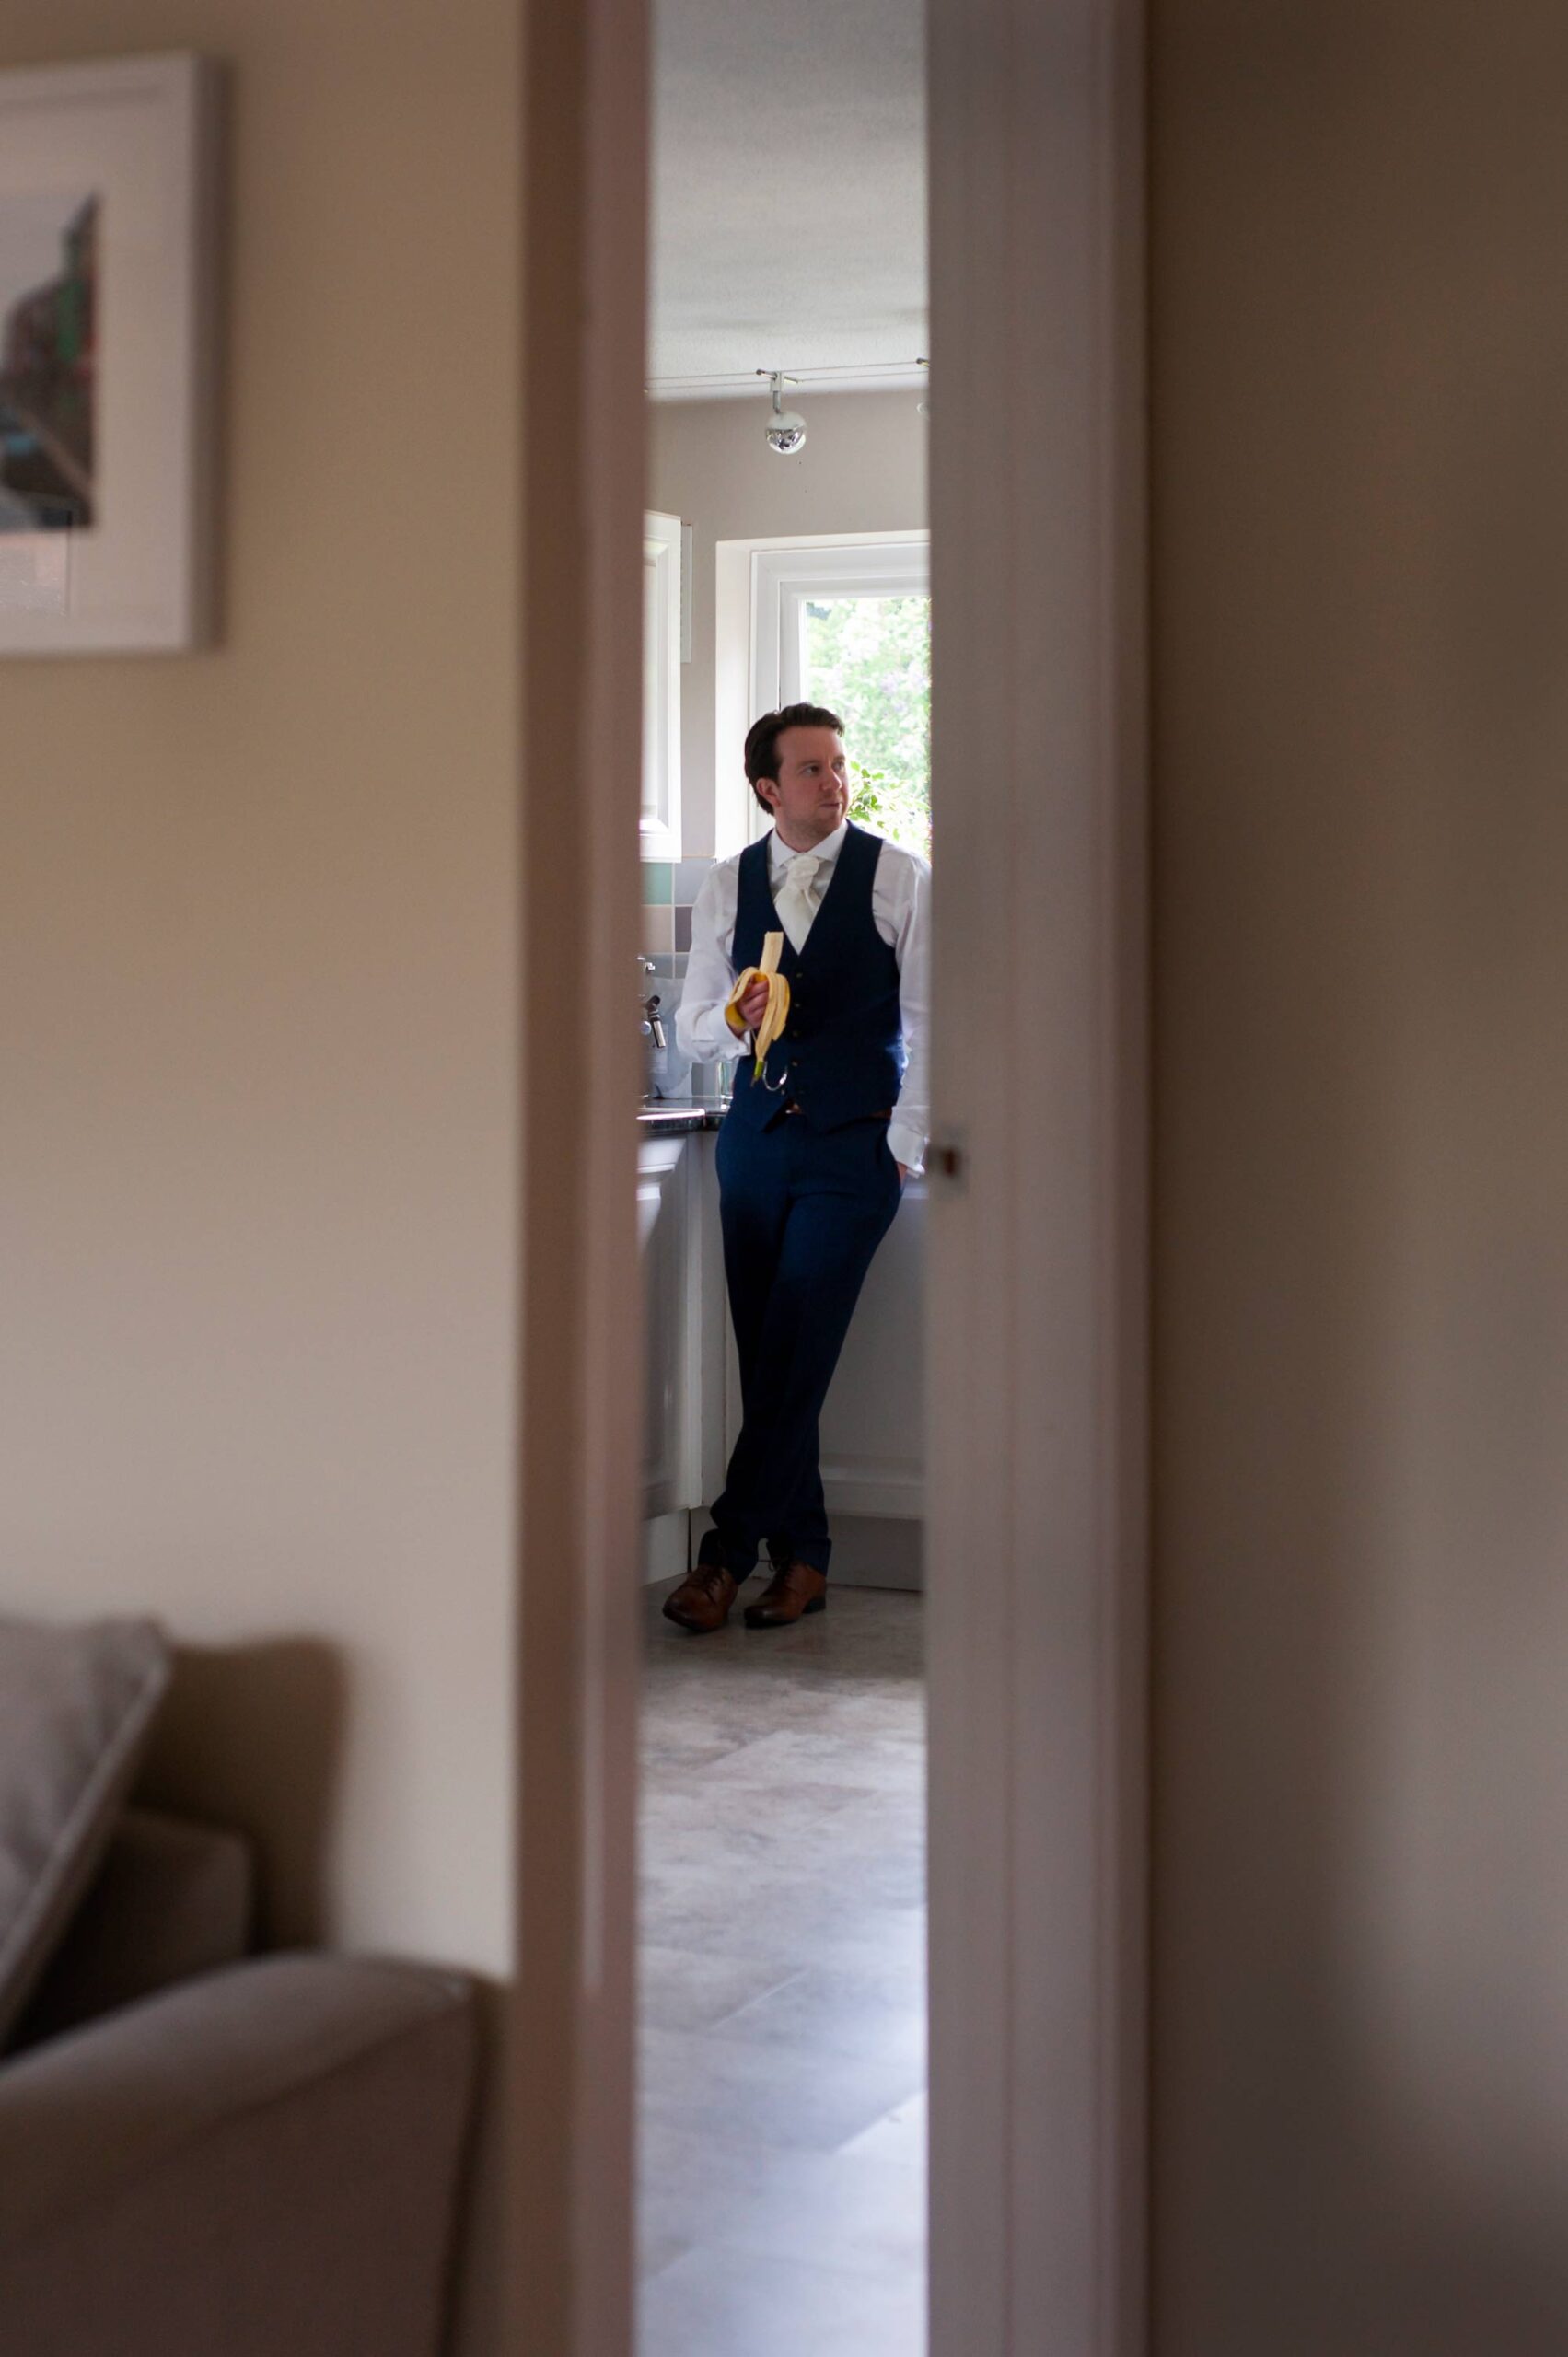 Groom eating a banana on morning of wedding by West Sussex wedding photographer James Robertshaw.